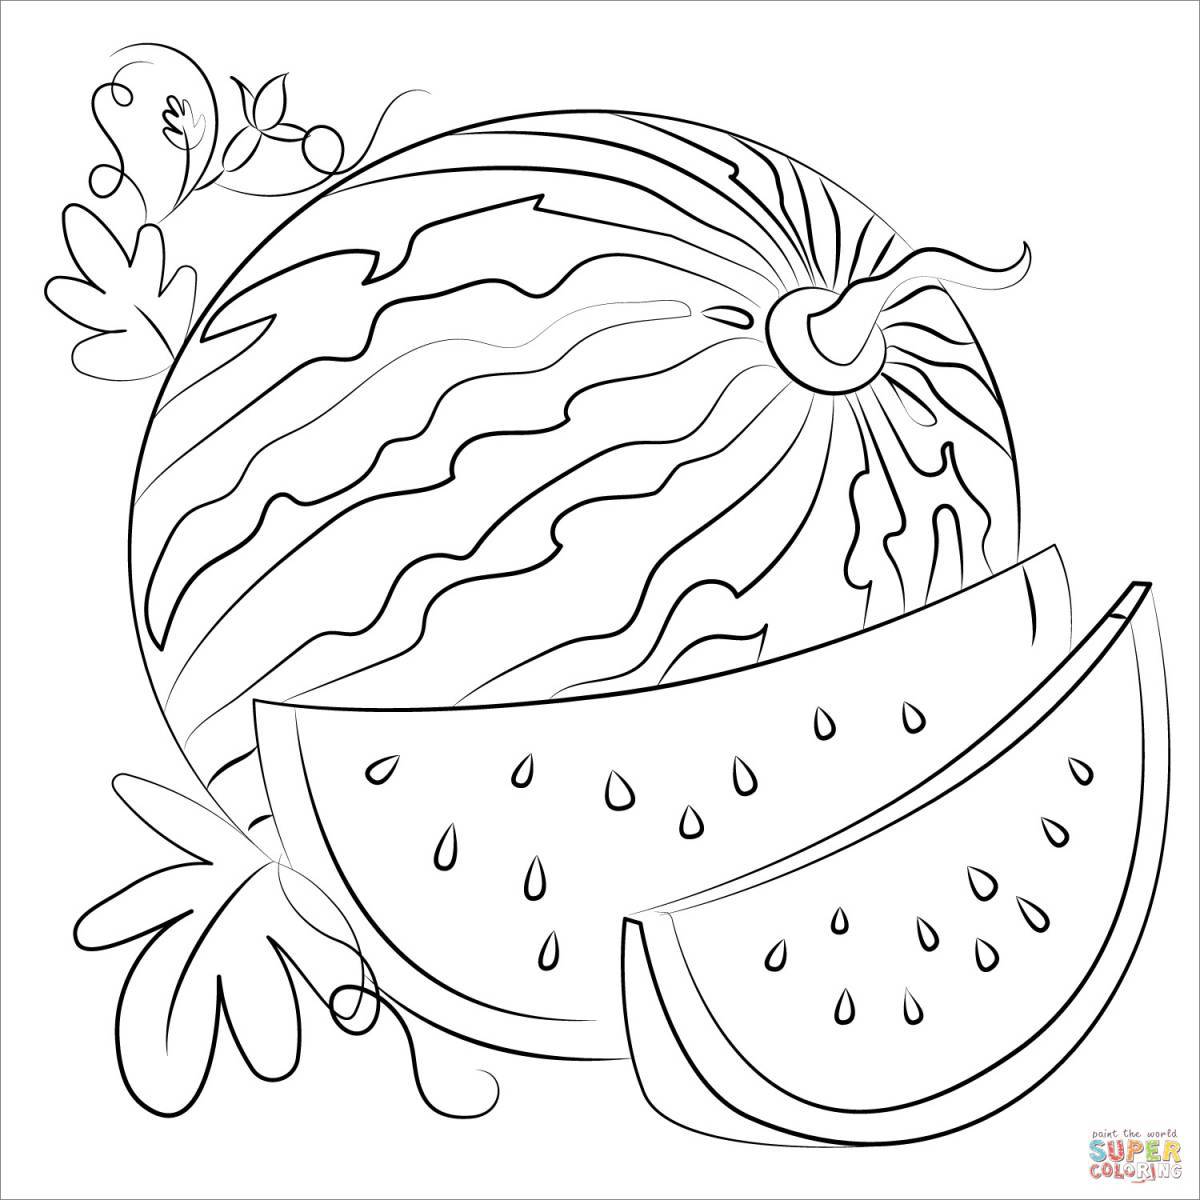 Playful watermelon coloring page for kids